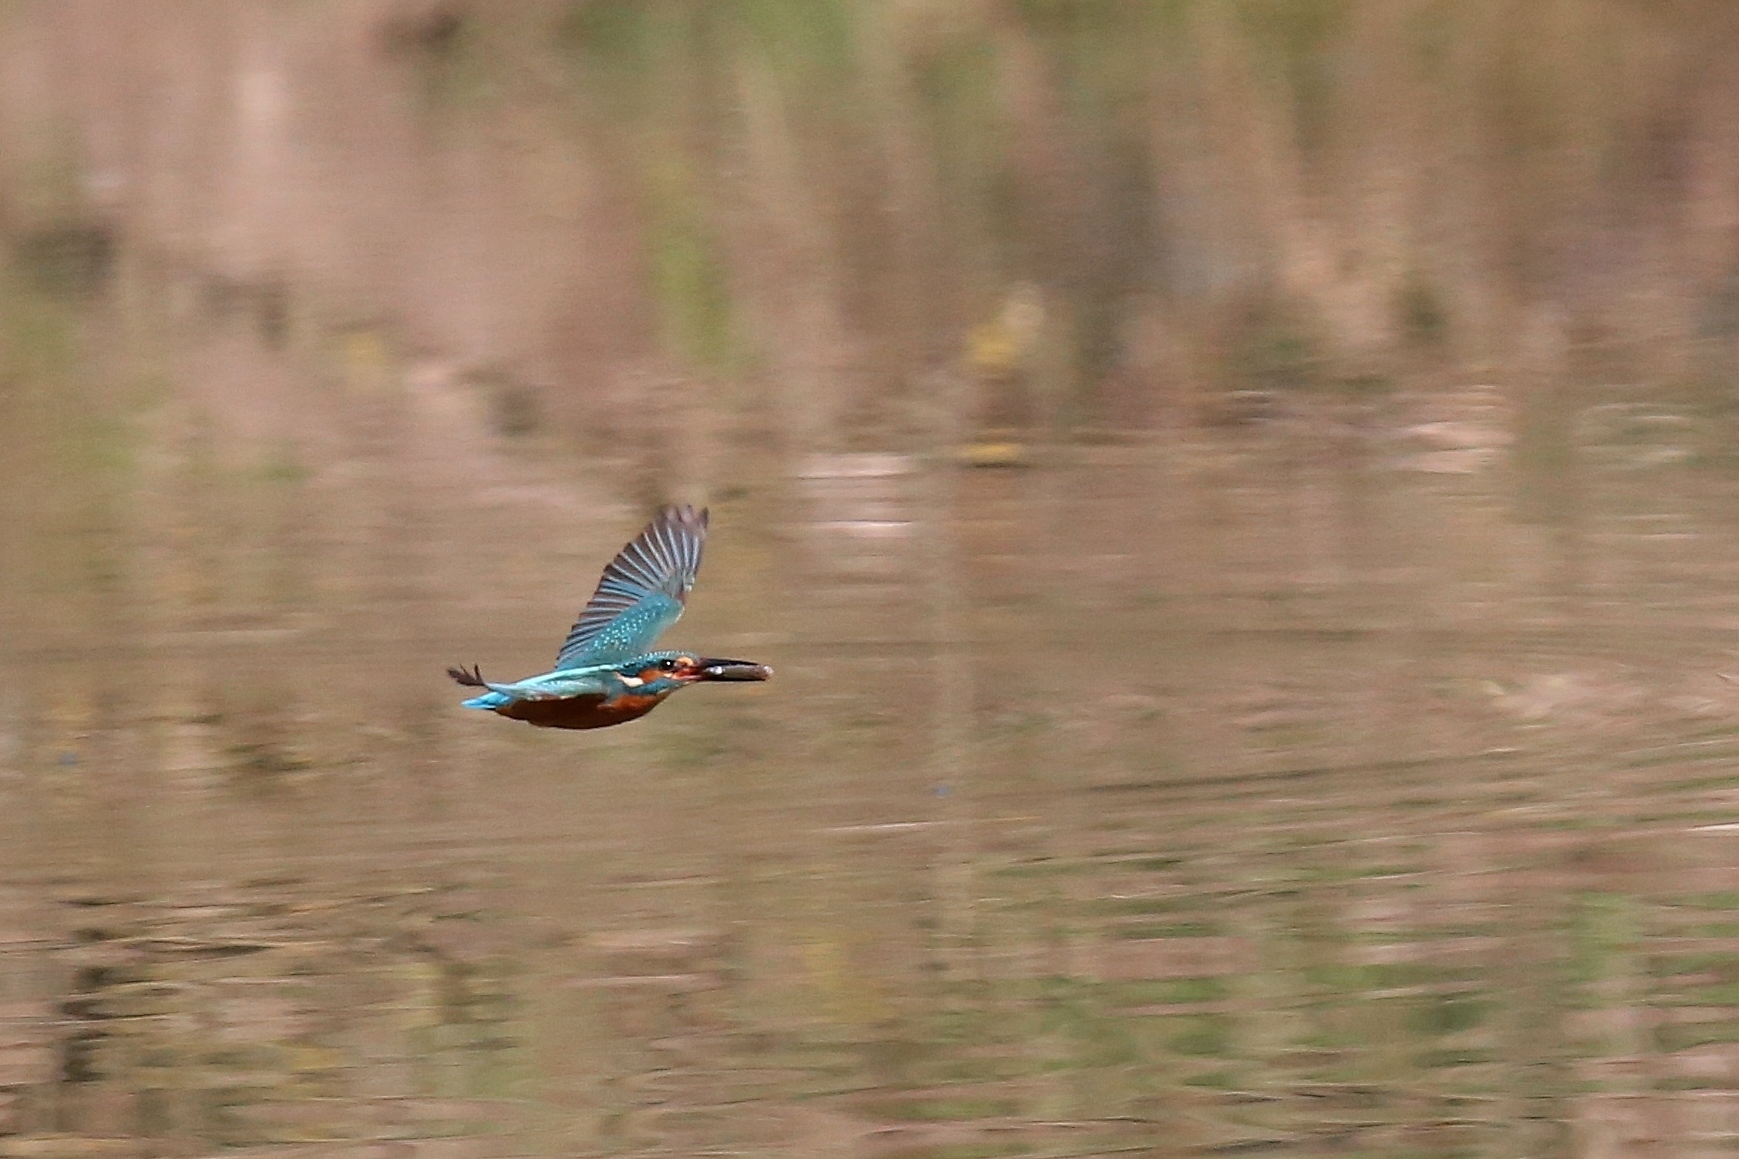 Kingfisher in flight with fish...